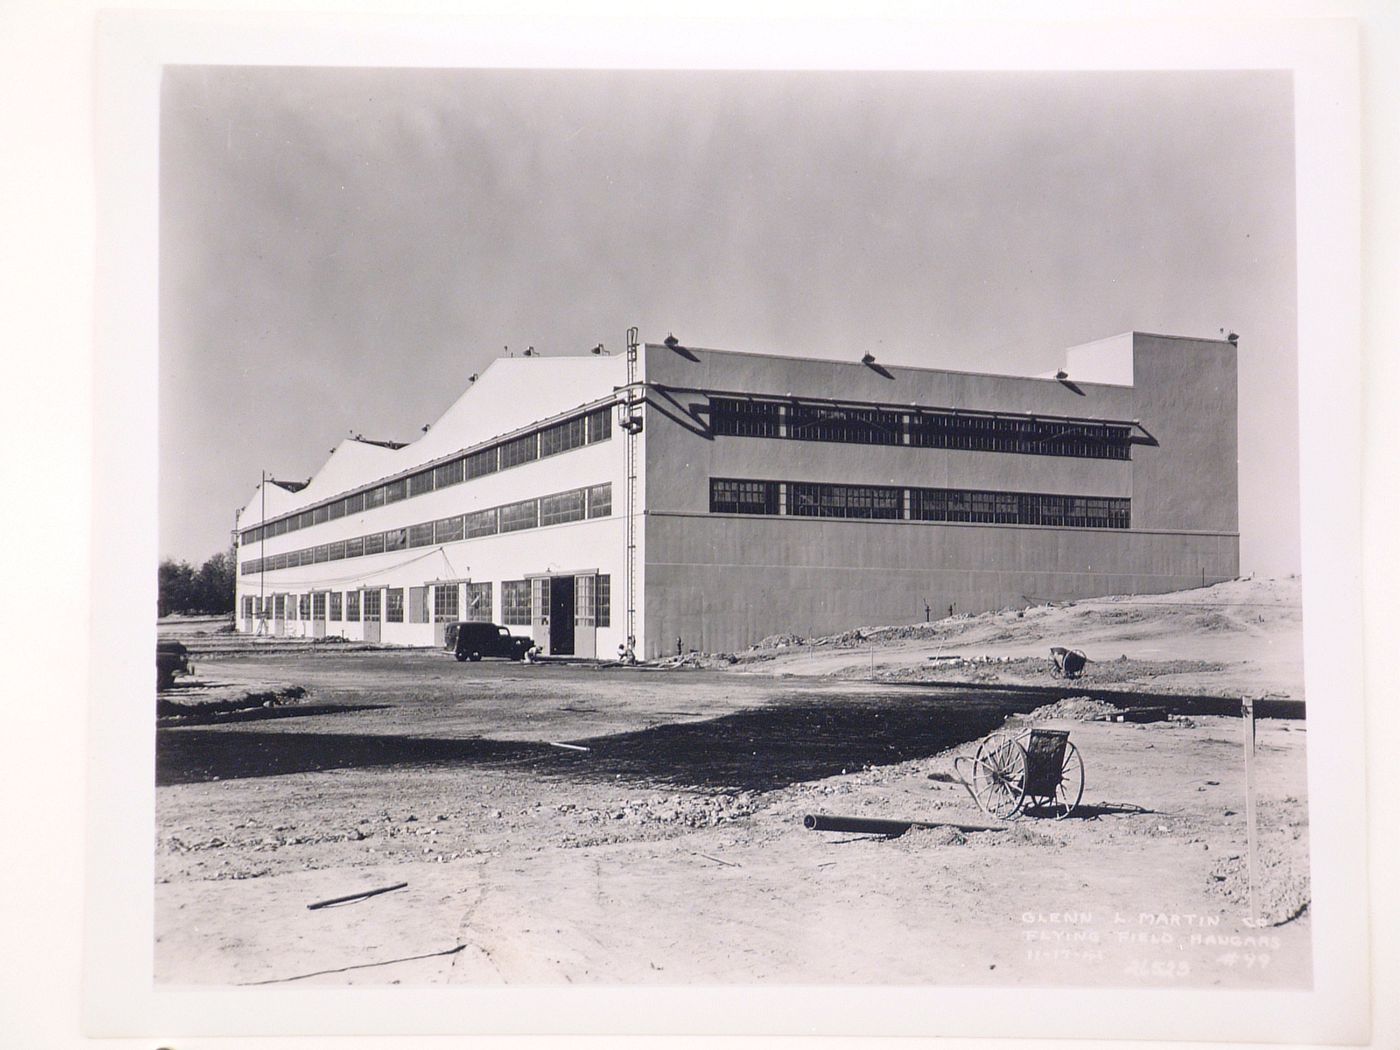 View of the principal and lateral façades of the Flying Field Hangar, Glenn L. Martin Company Navy Assembly Plant No. 2 [?], Middle River, Maryland